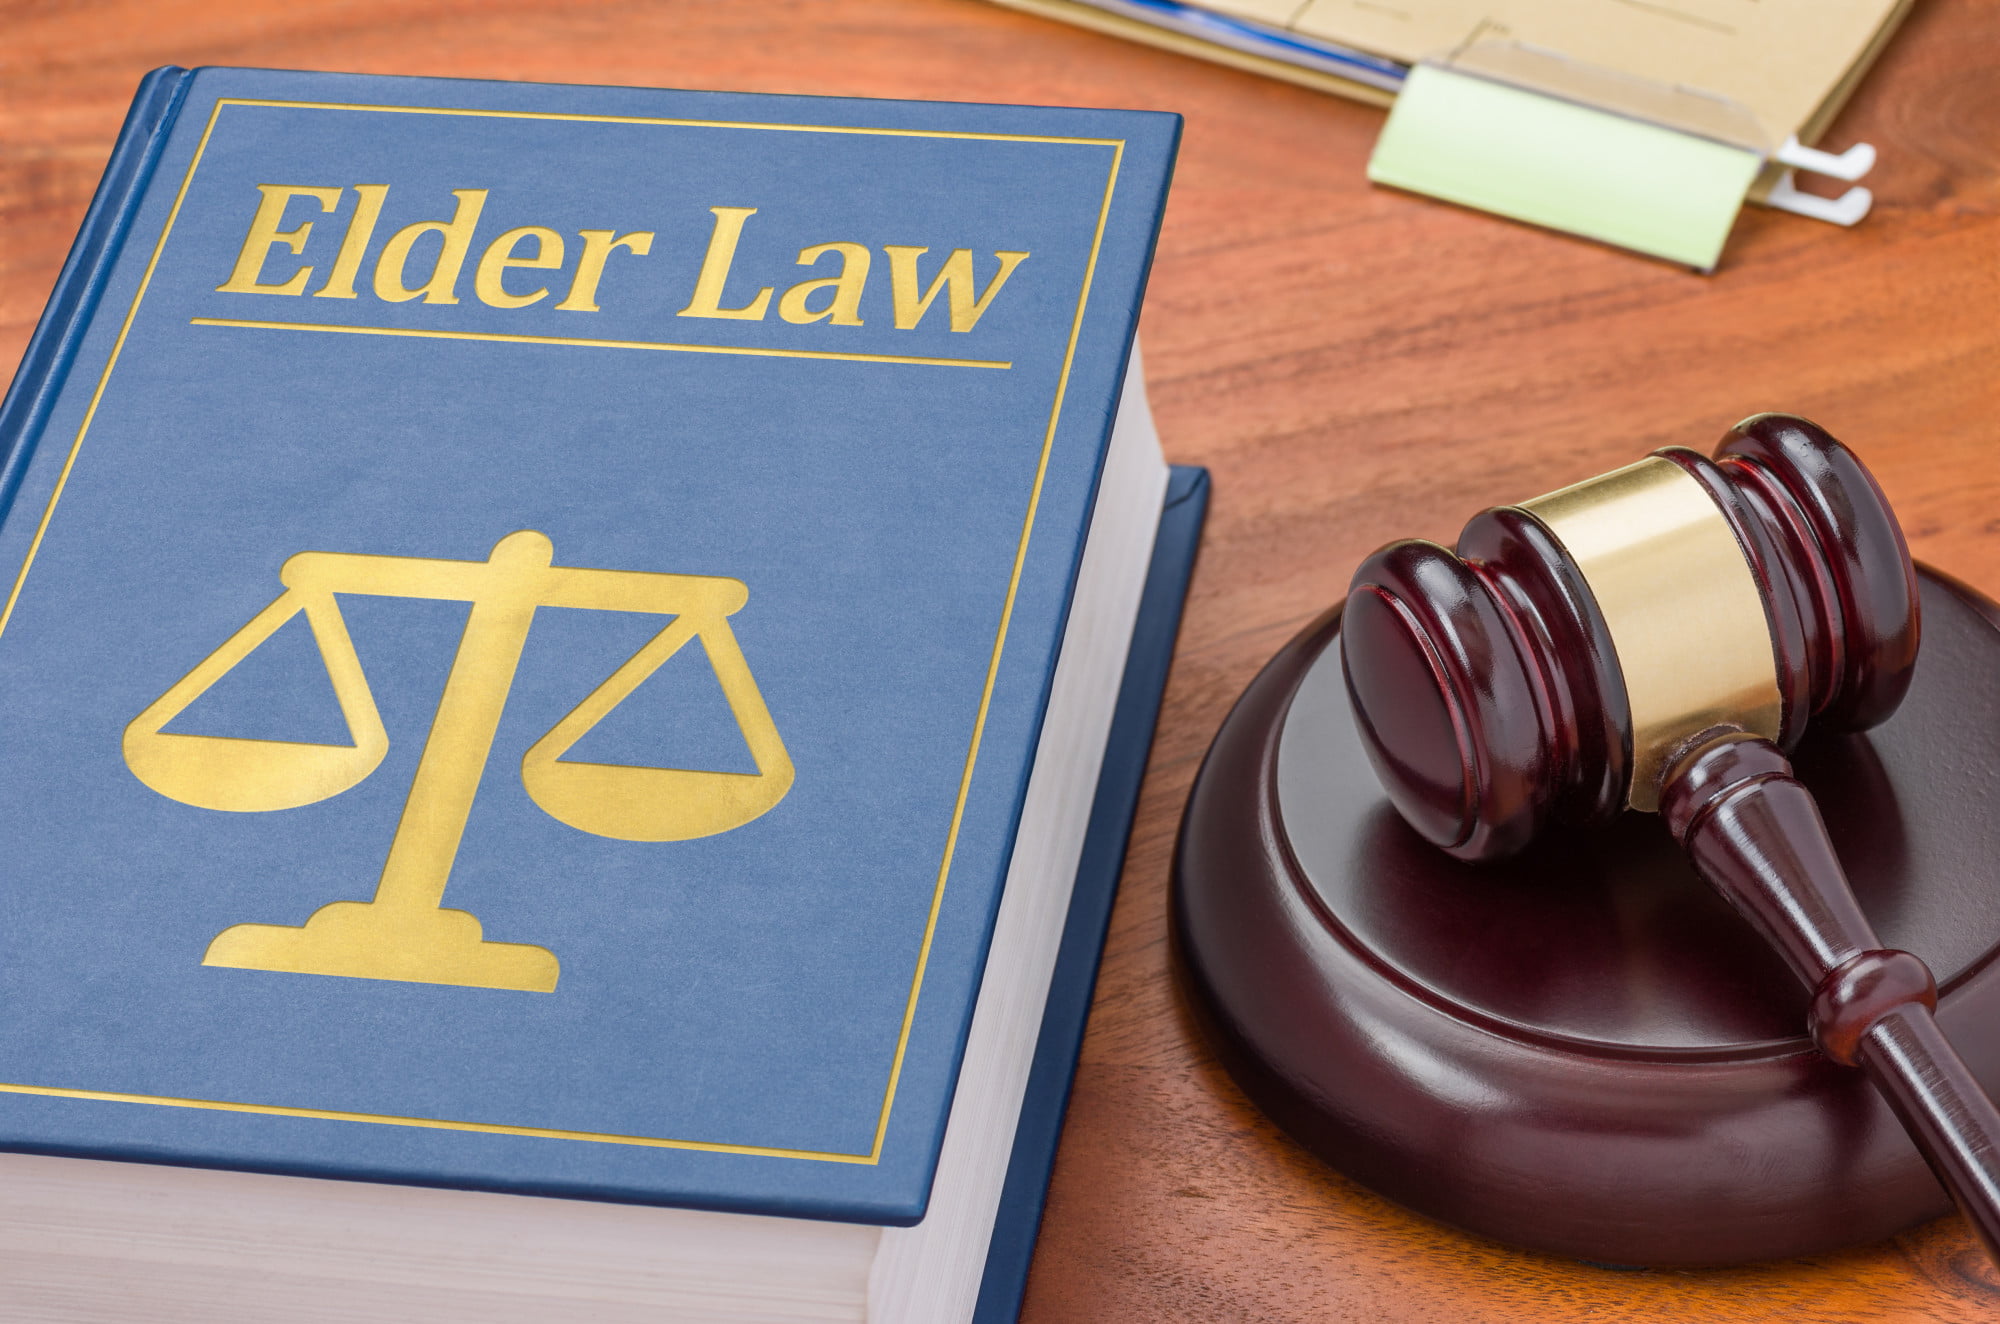 Finding the right attorney to help an older relative requires knowing your options. Here are the top factors to consider when choosing elder law attorneys.